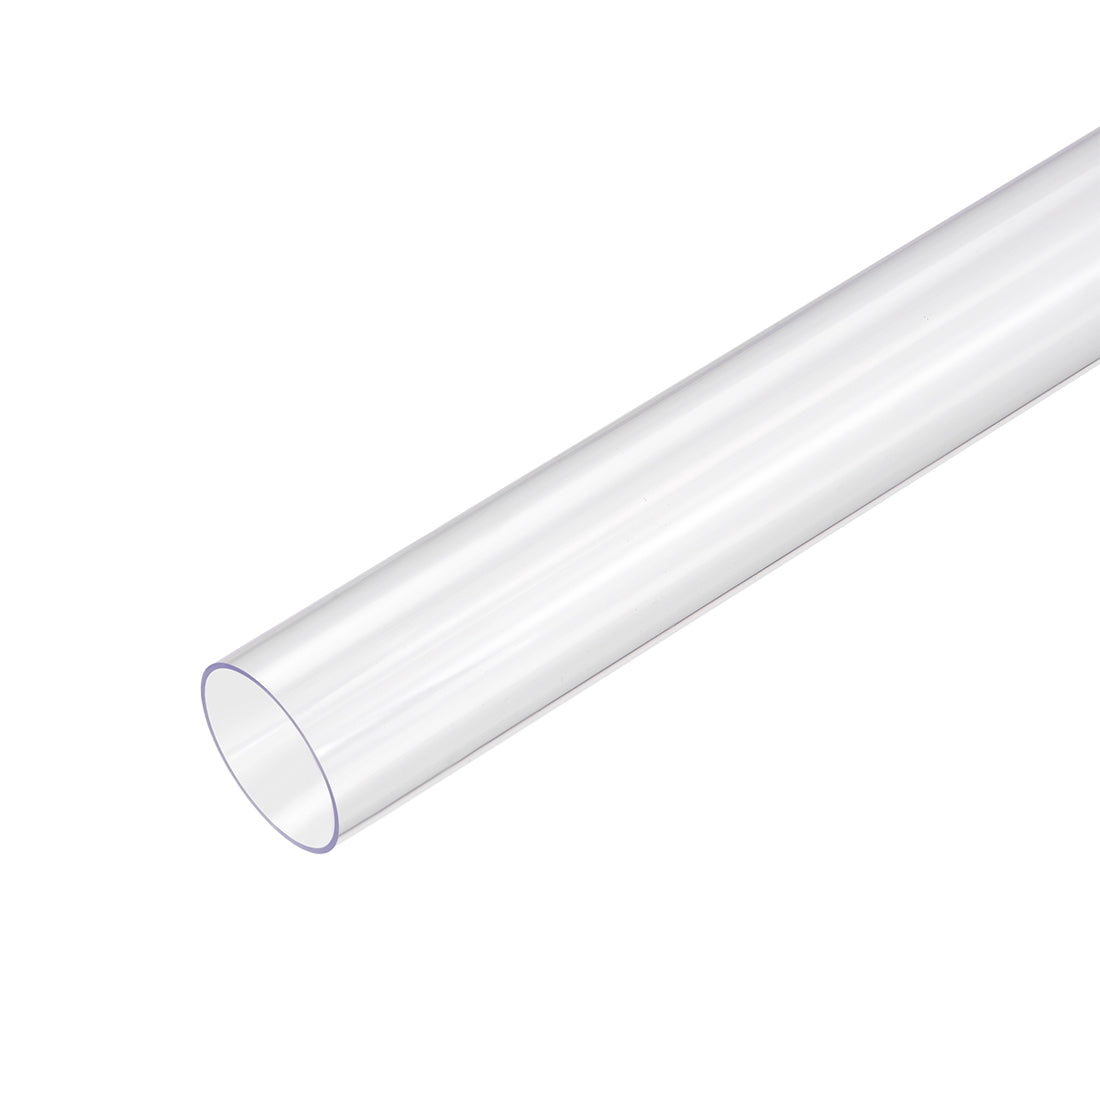 uxcell Uxcell PVC Rigid Round Tubing,Clear,23mm ID x 25mm OD,0.5M/1.64Ft Length,3pcs